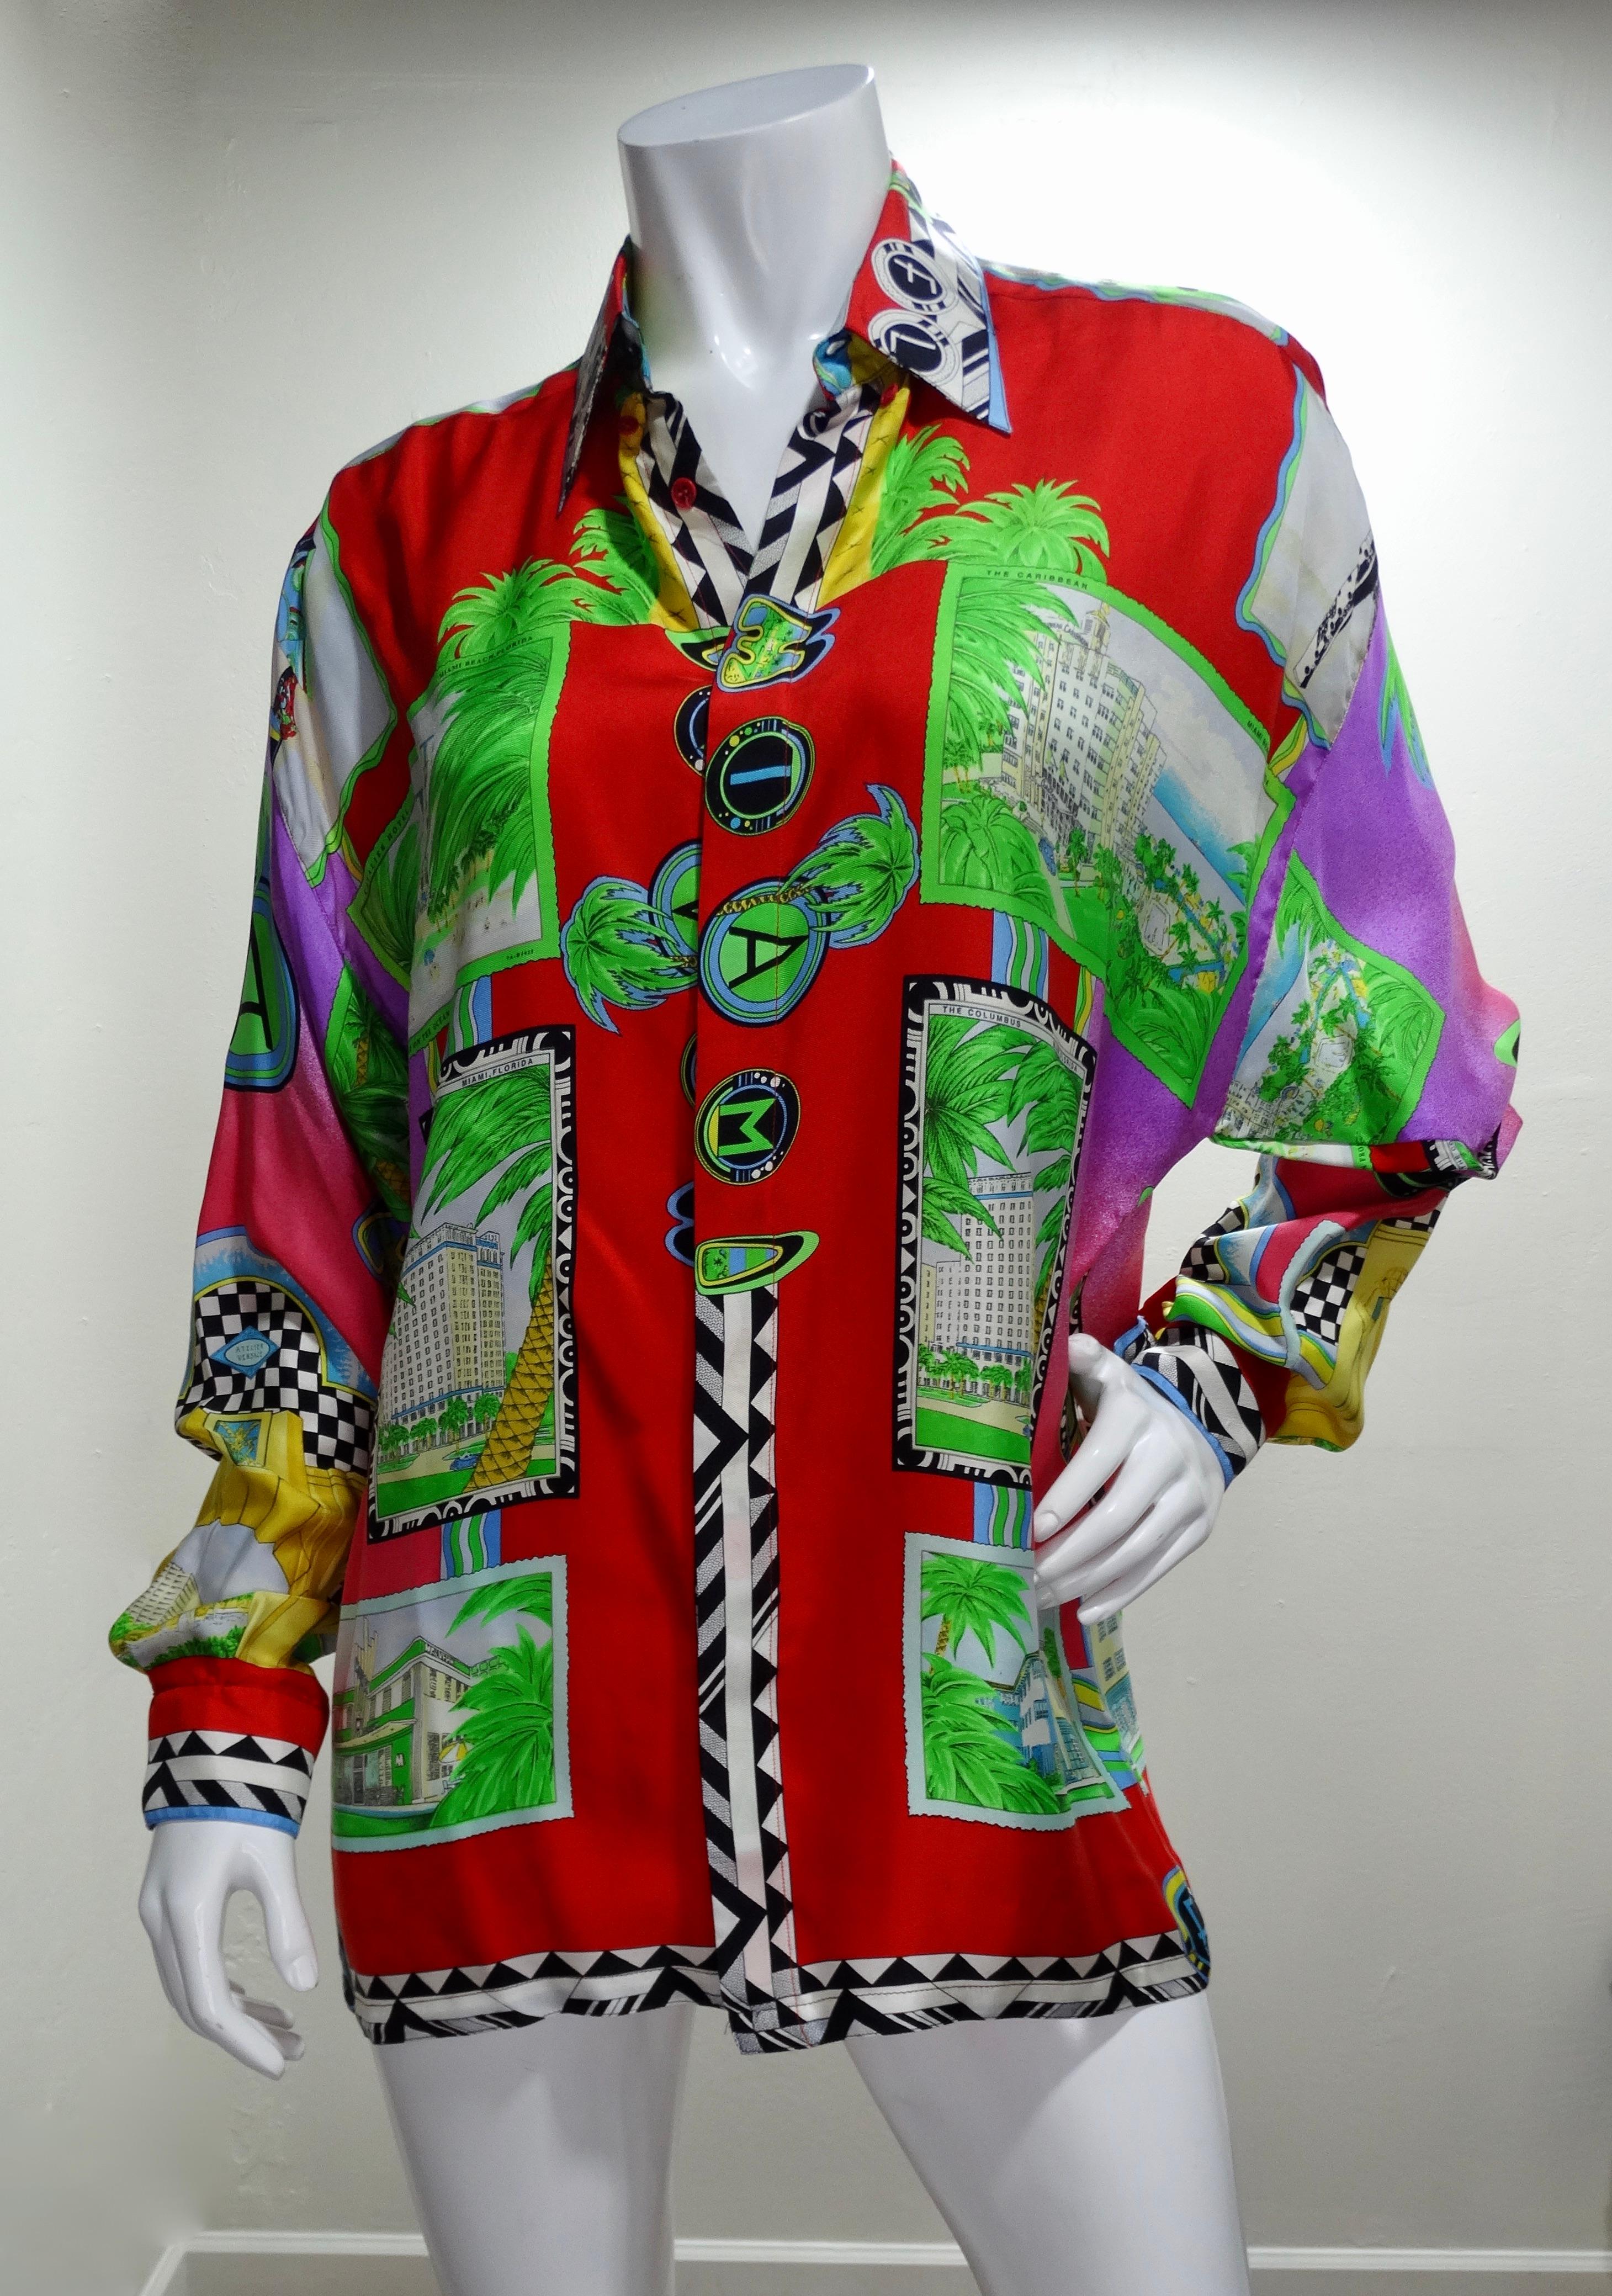 Gianna Versace straight from the archives! Circa 1990s, this silk shirt features a Miami inspired print with bright ombre neon colors, various tropicana floral arrangements, postcards with destinations in Miami beach and decorative fonts spelling